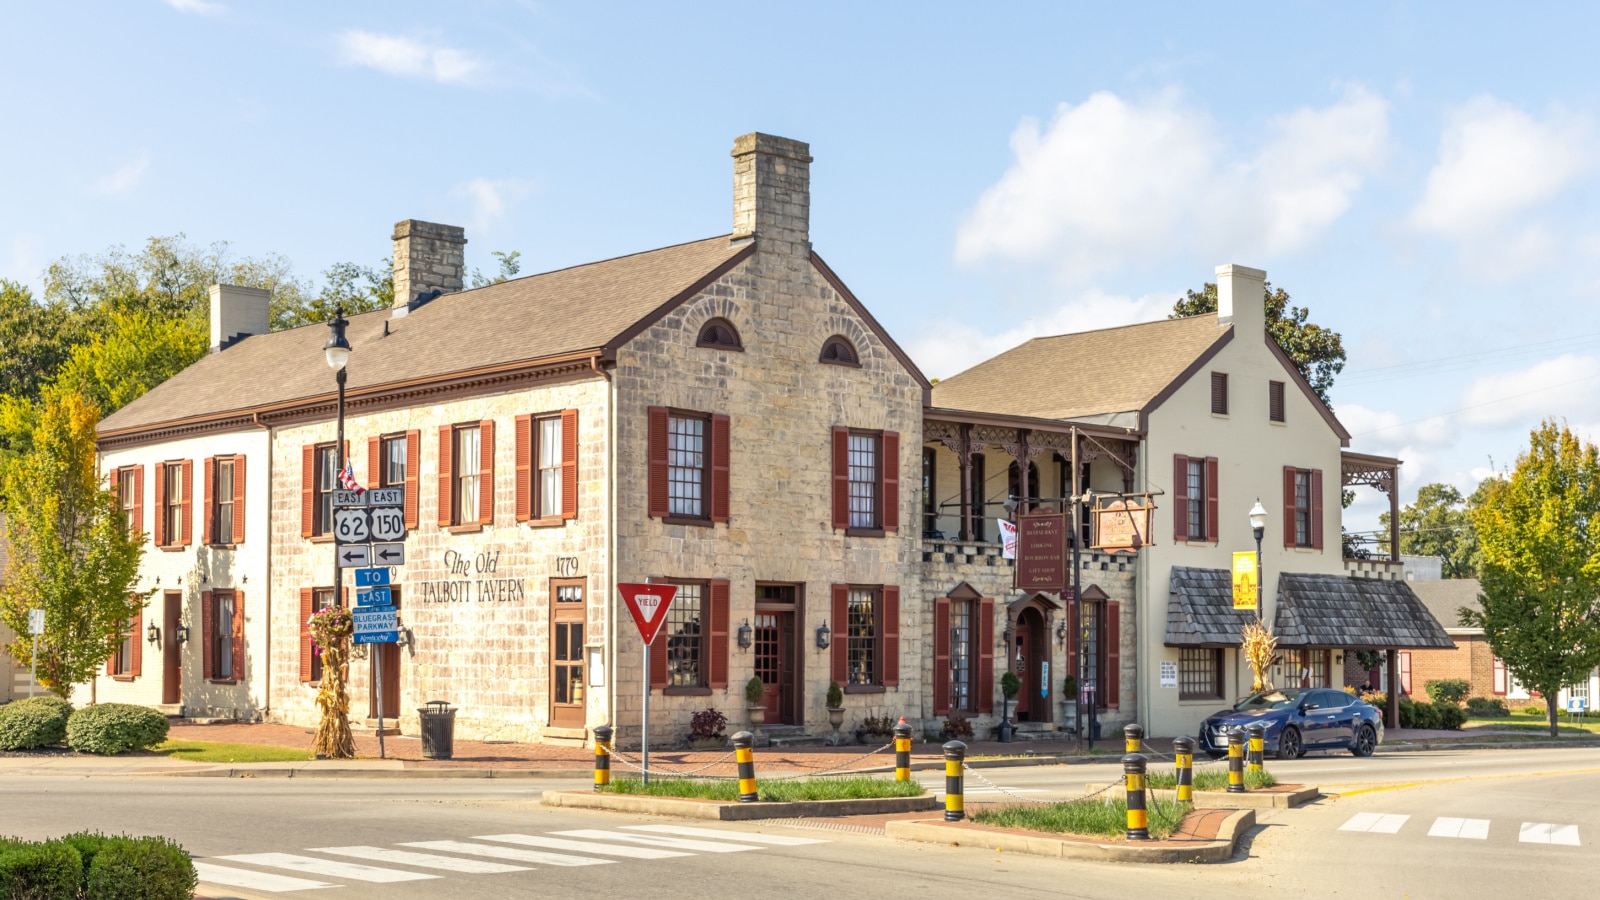 Bardstwon, Kentucky; USA; Sept. 26, 2020. The Old Talbott Tavern was built in 1779 which is one of the oldest and most popular resting spots because of its central location.